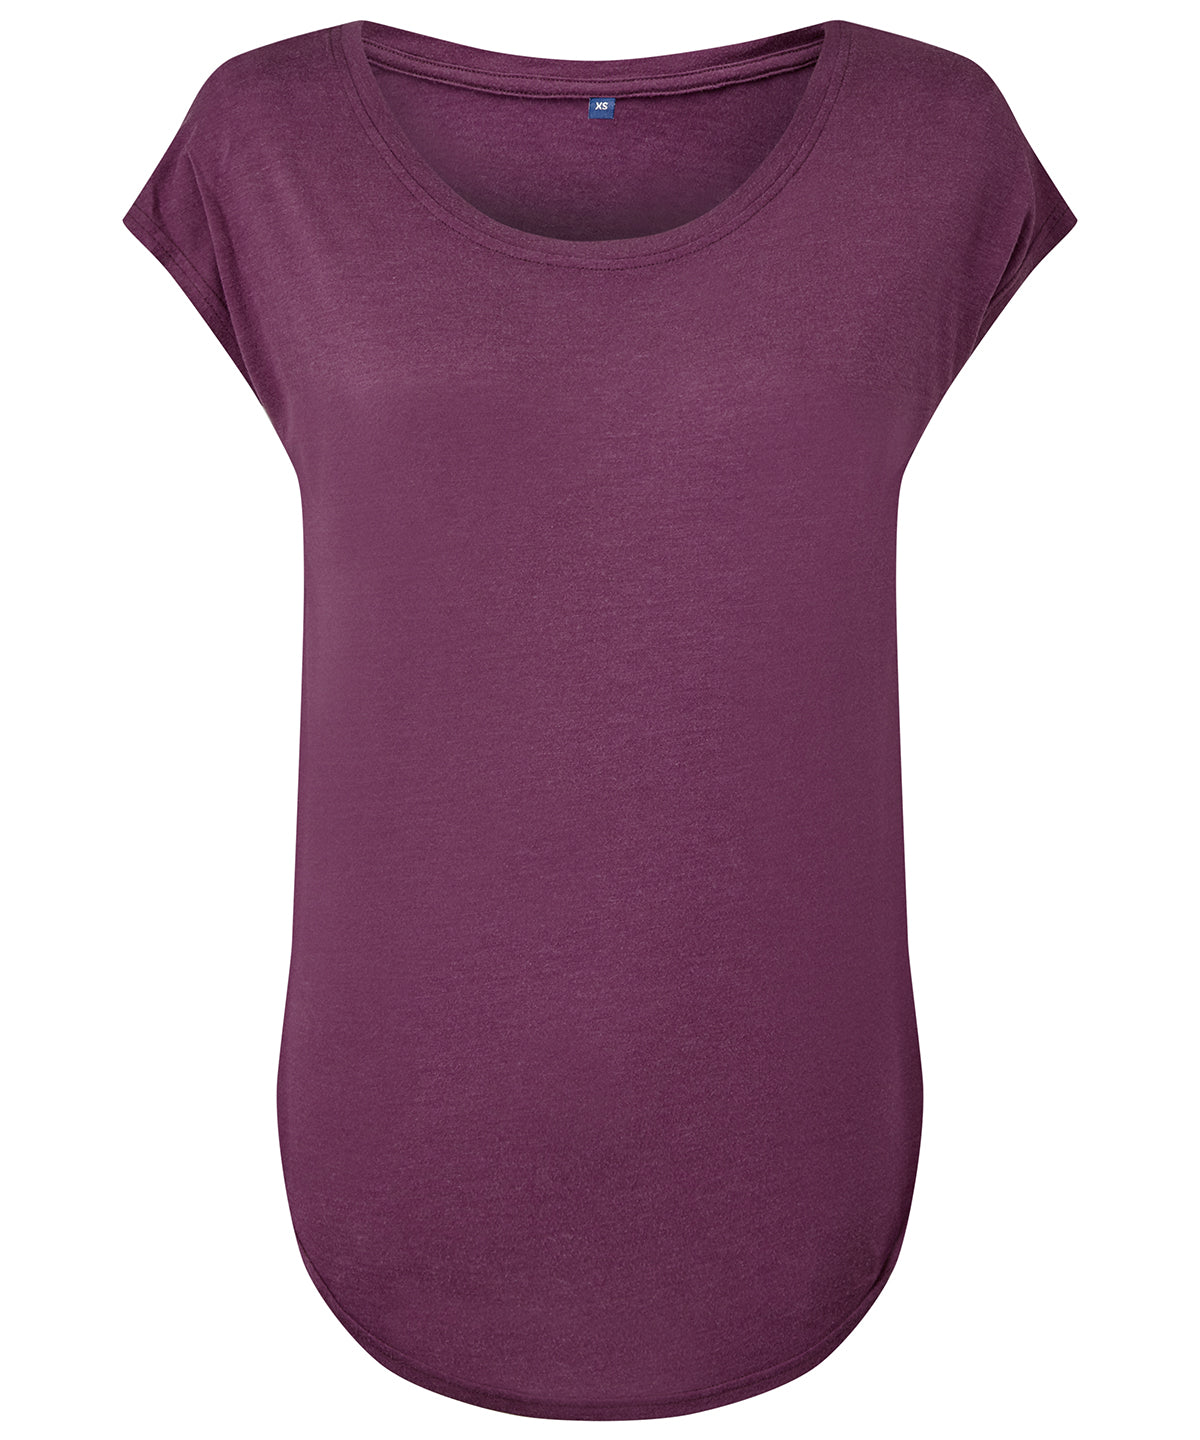 Plum - Women's TriDri® yoga cap sleeve top T-Shirts TriDri® Activewear & Performance, Exclusives, On-Trend Activewear, Padded Perfection, Plus Sizes, Rebrandable, Sports & Leisure, T-Shirts & Vests Schoolwear Centres